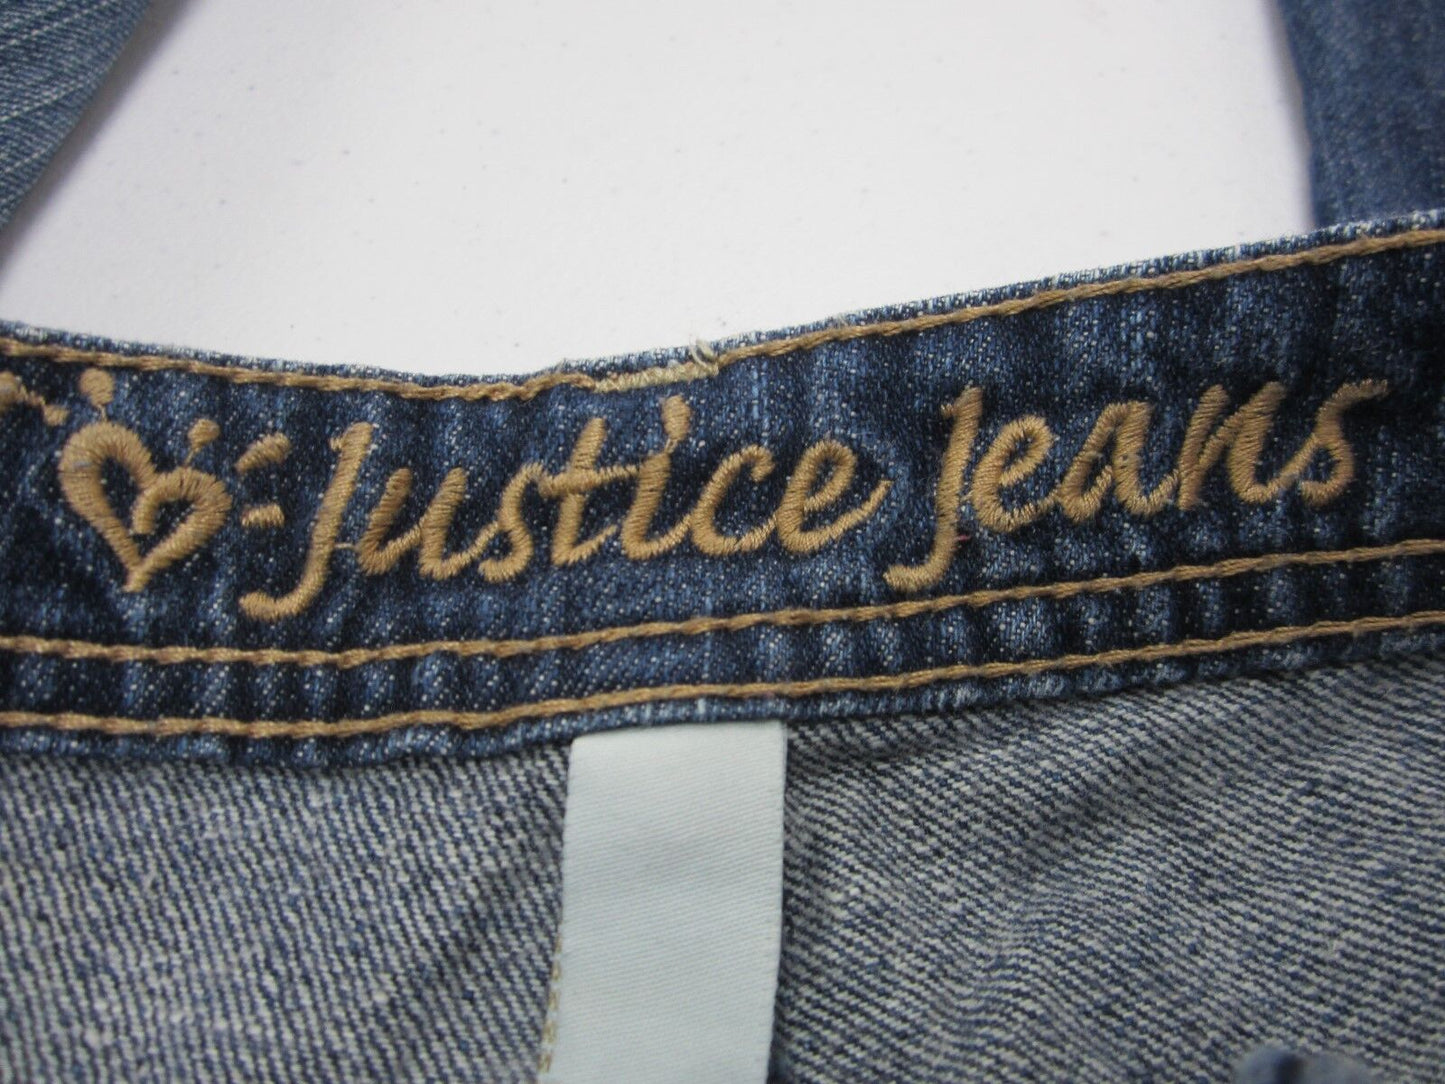 MINT Justice   Girl's Blue Jeans Cuffed Leg Size 12S Simply Low Distressed Stud